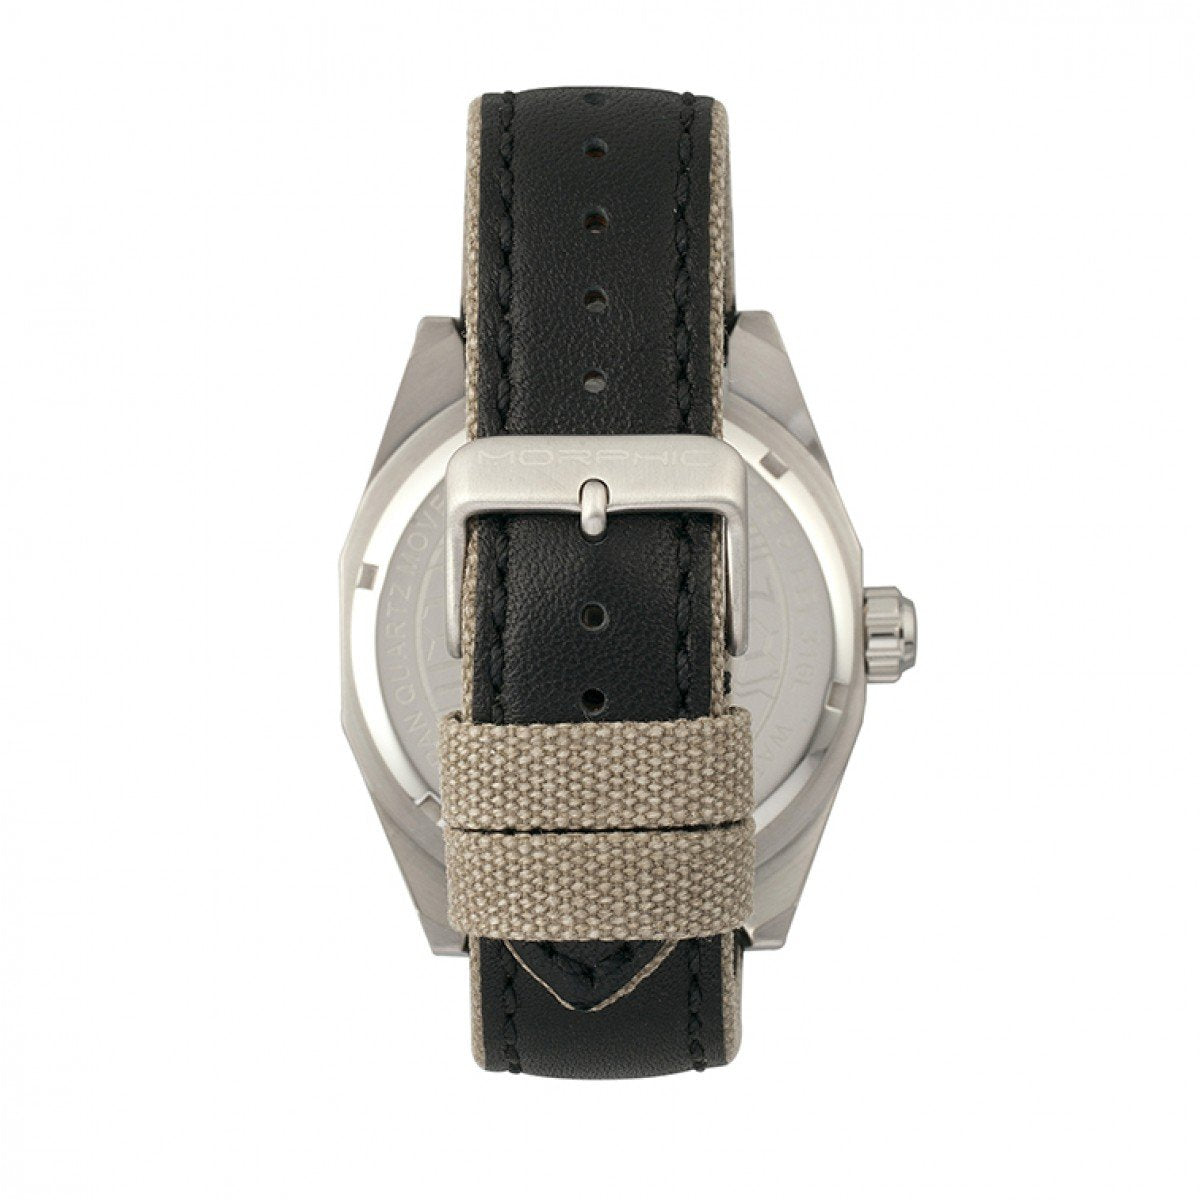 Morphic M59 Series Leather-Overlaid Canvas-Band Watch - Silver/Black - MPH5902